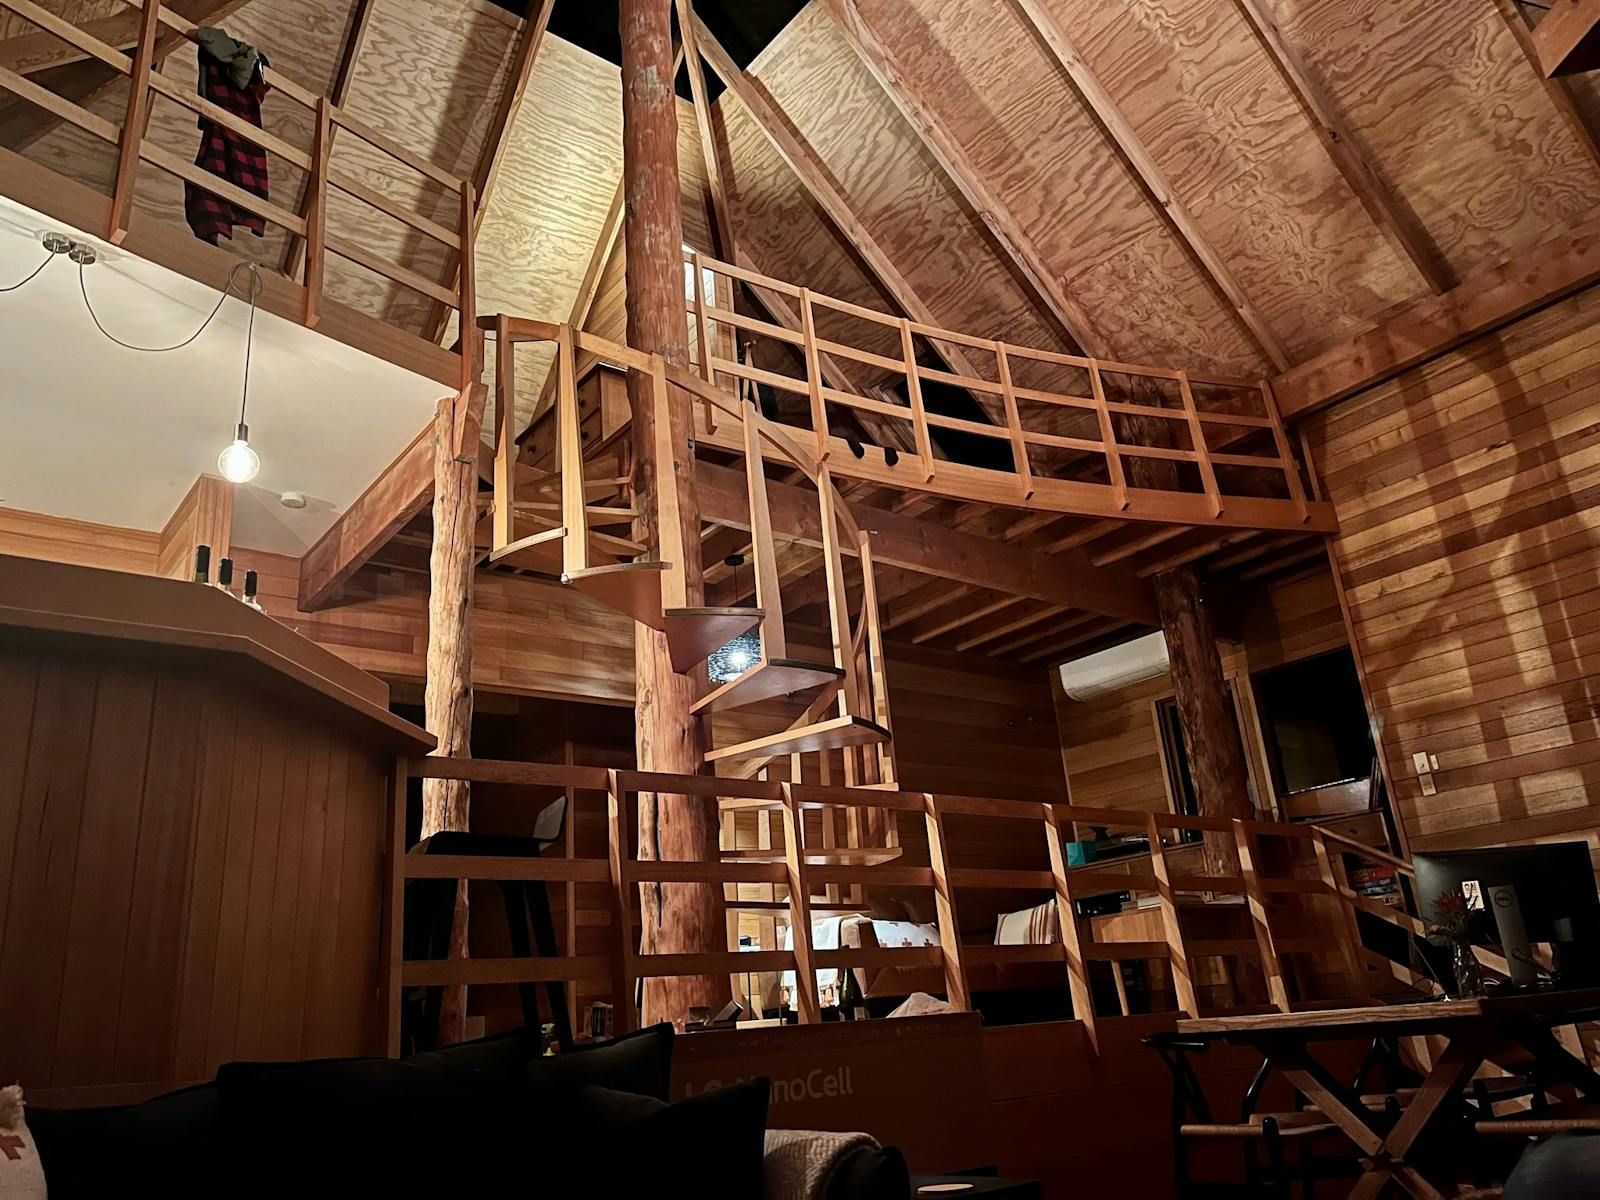 Inside the stunning treehouse at night